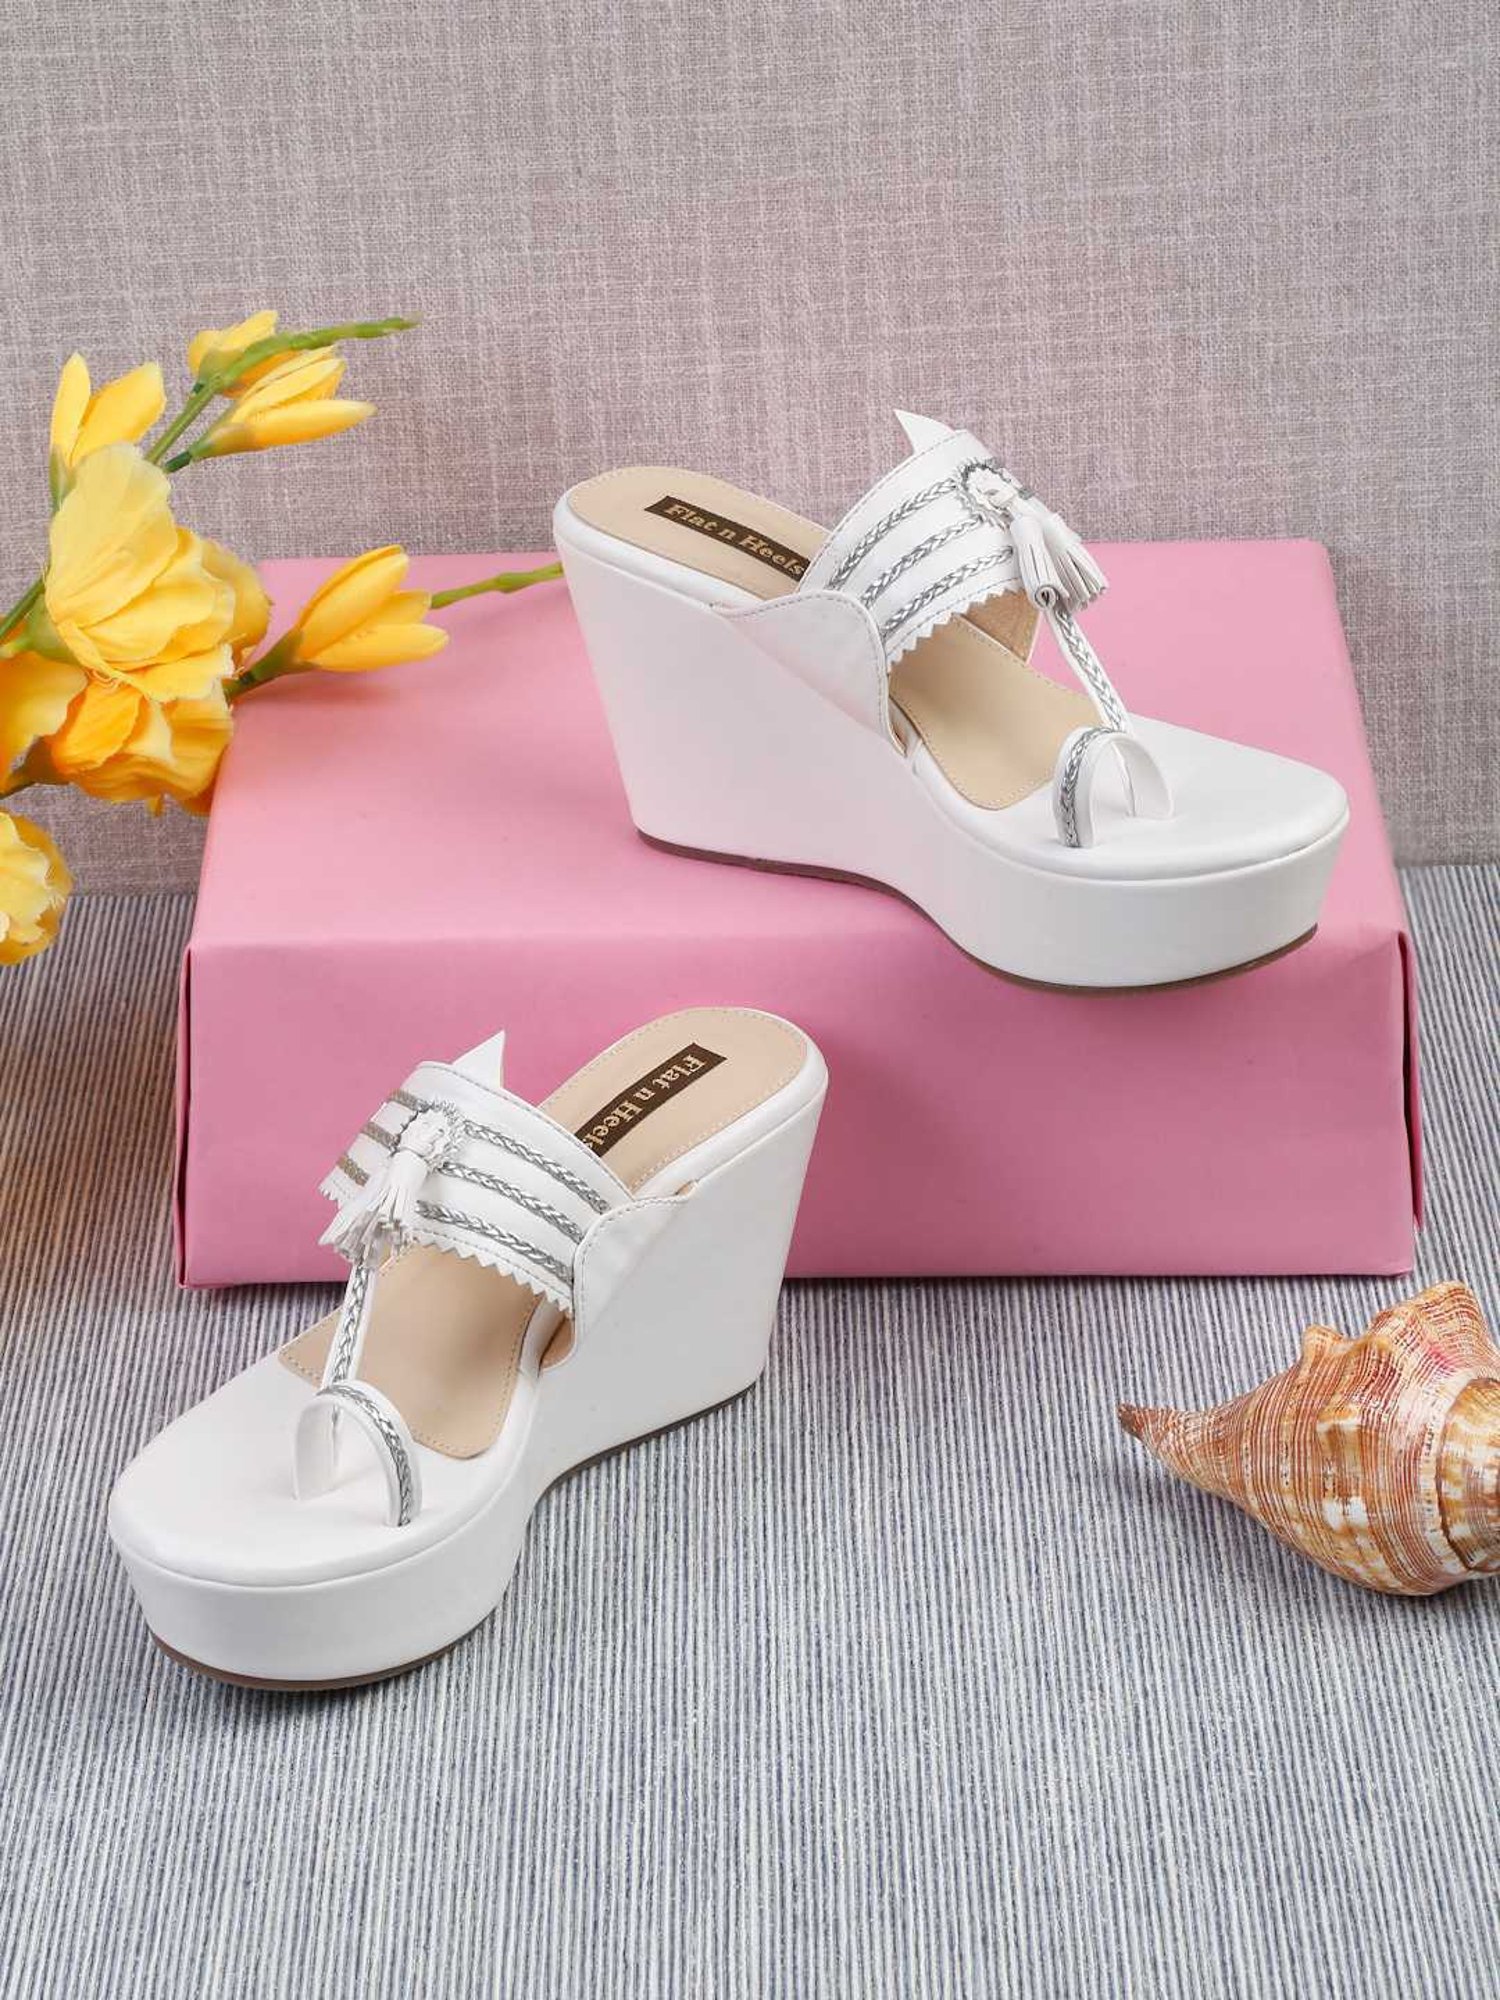 Summer Hollow Out Platform Nightclub Fashion Pumps Woman Super High Heel  Wedges Sandals Sexy Ankle Buckle Peep Toe Party Shoes - Women's Sandals -  AliExpress